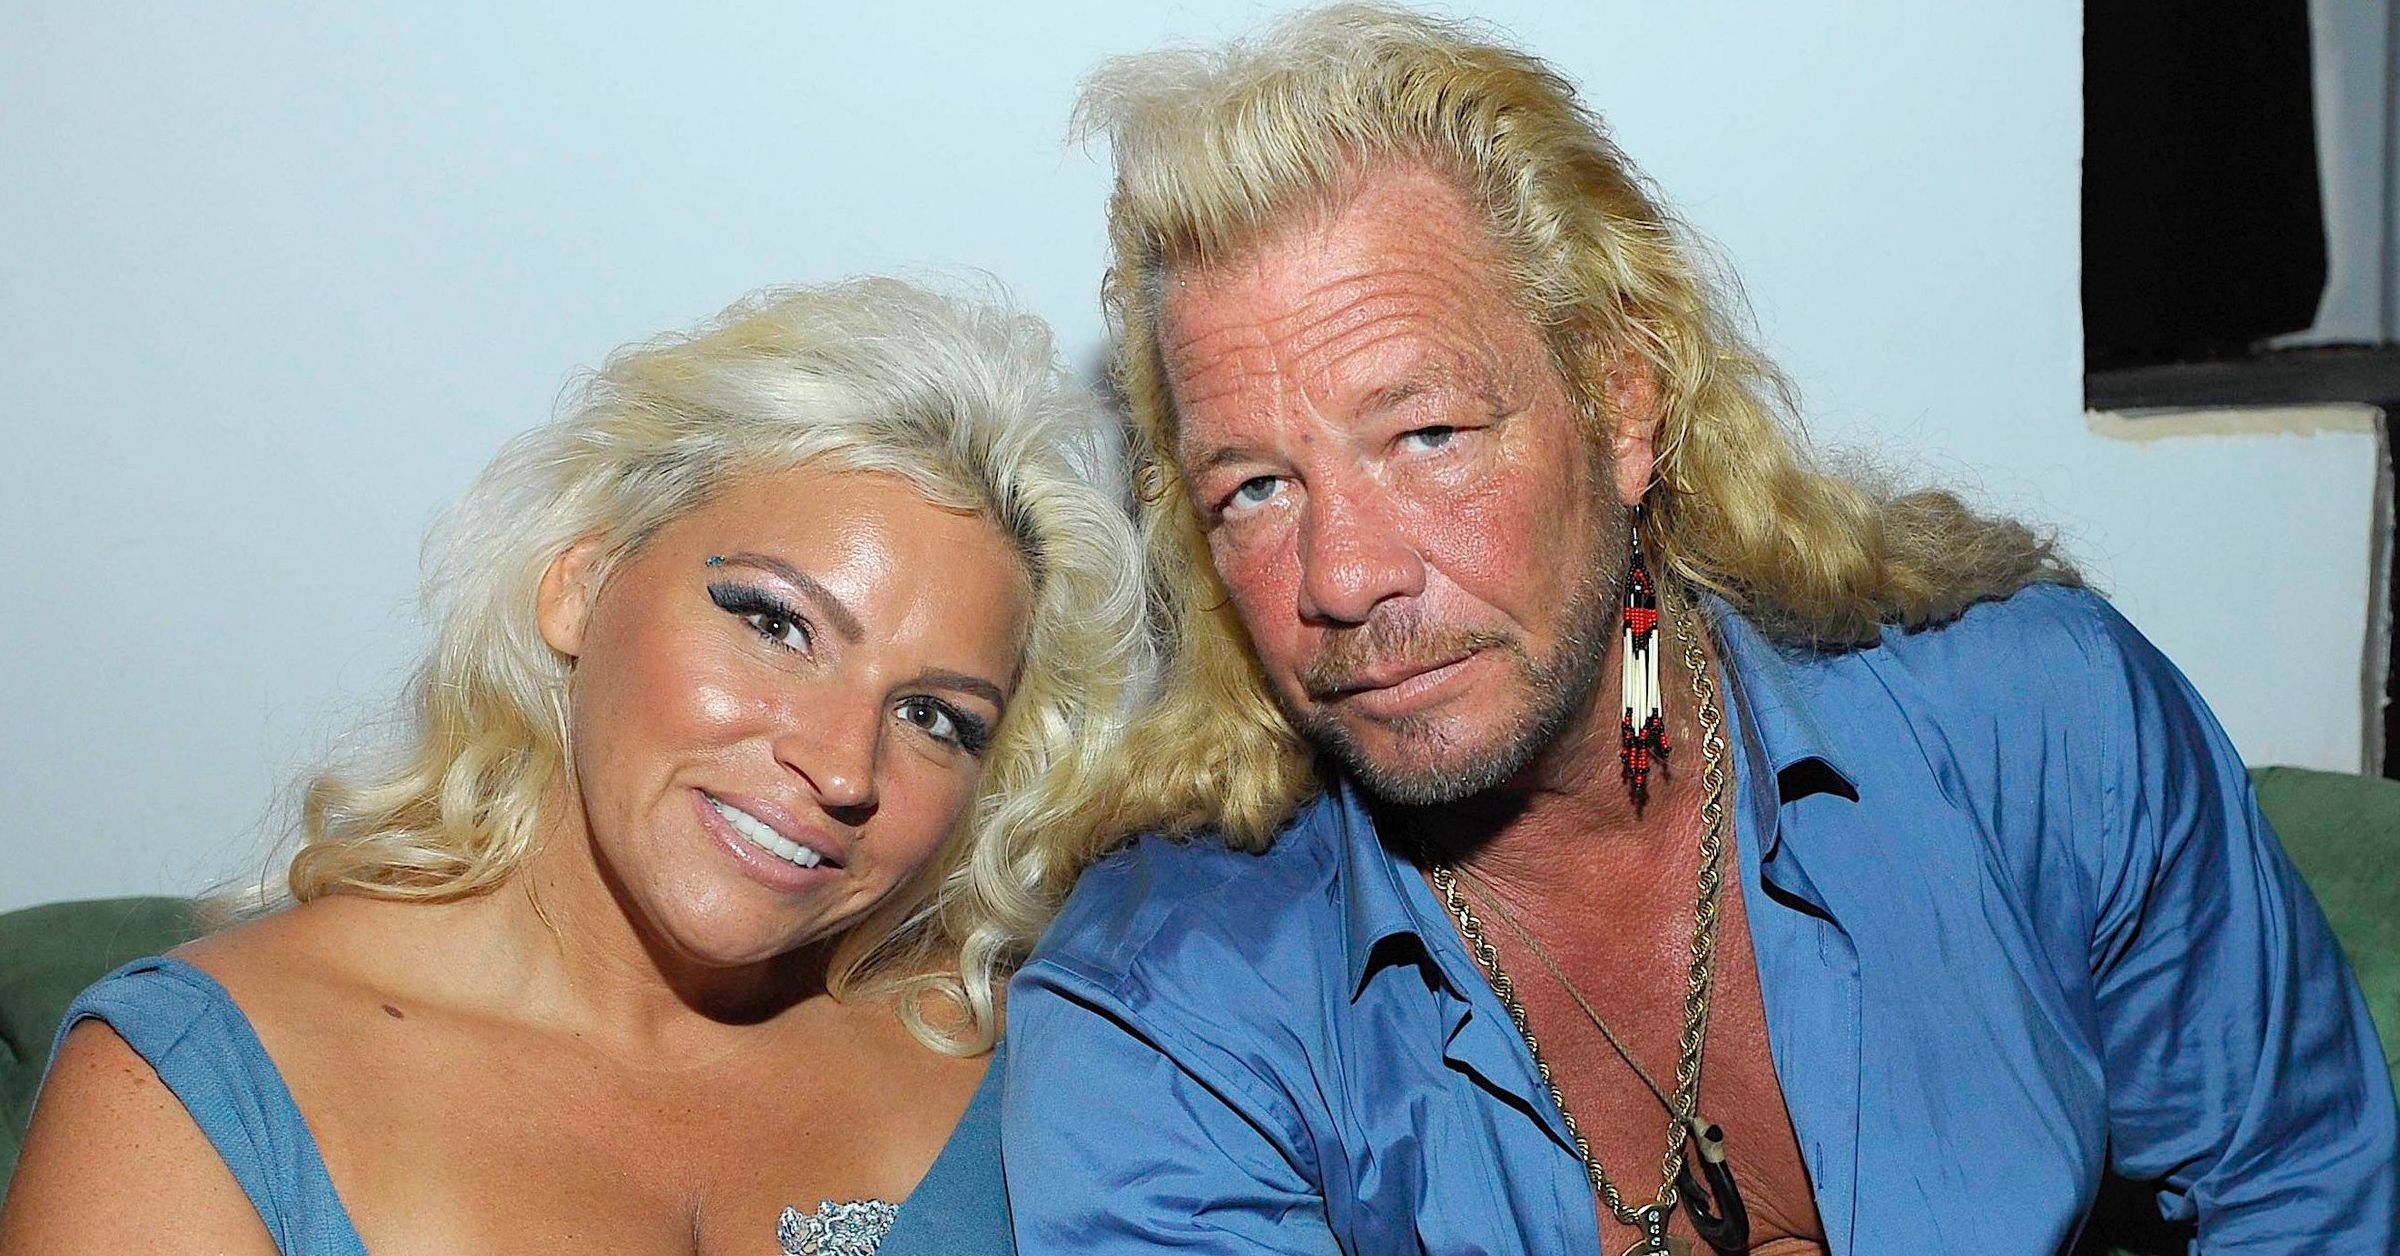 Moon Angell Sidesteps Questions About Duane 'Dog' Chapman's Shocking Marriage Proposal